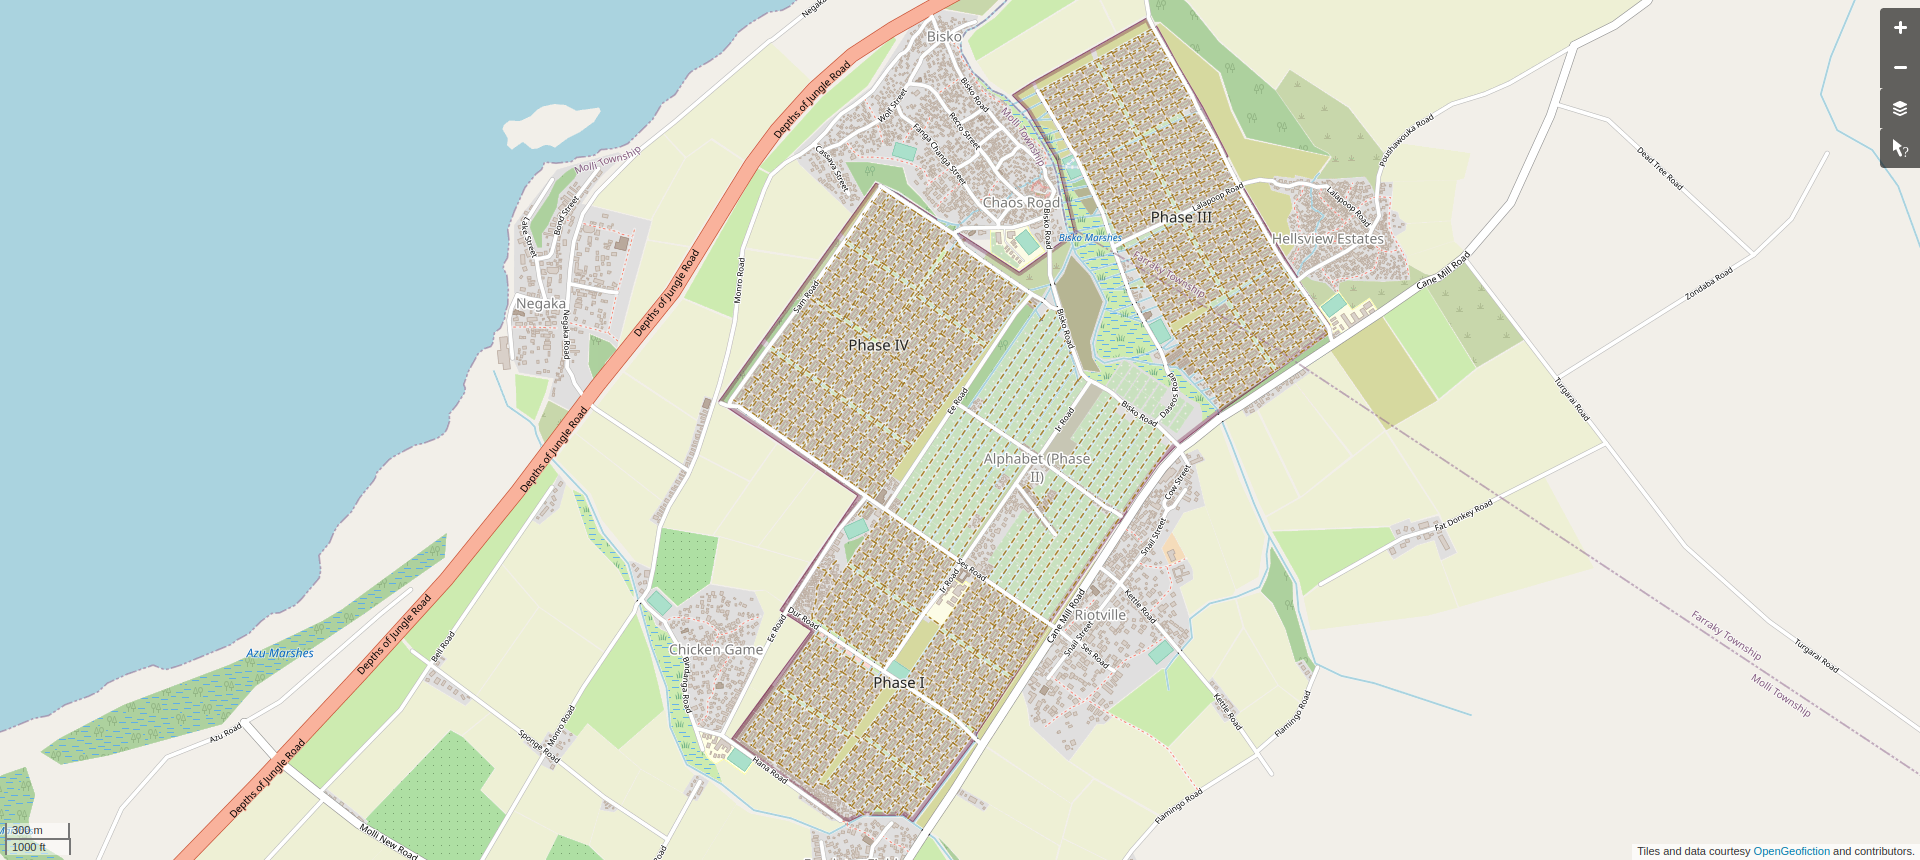 Screenshot of the map window on the OpenGeofiction website, showing the patchworked grids of the Irhoborin refugee camp and some surrounding, chaotically-laid-out communities